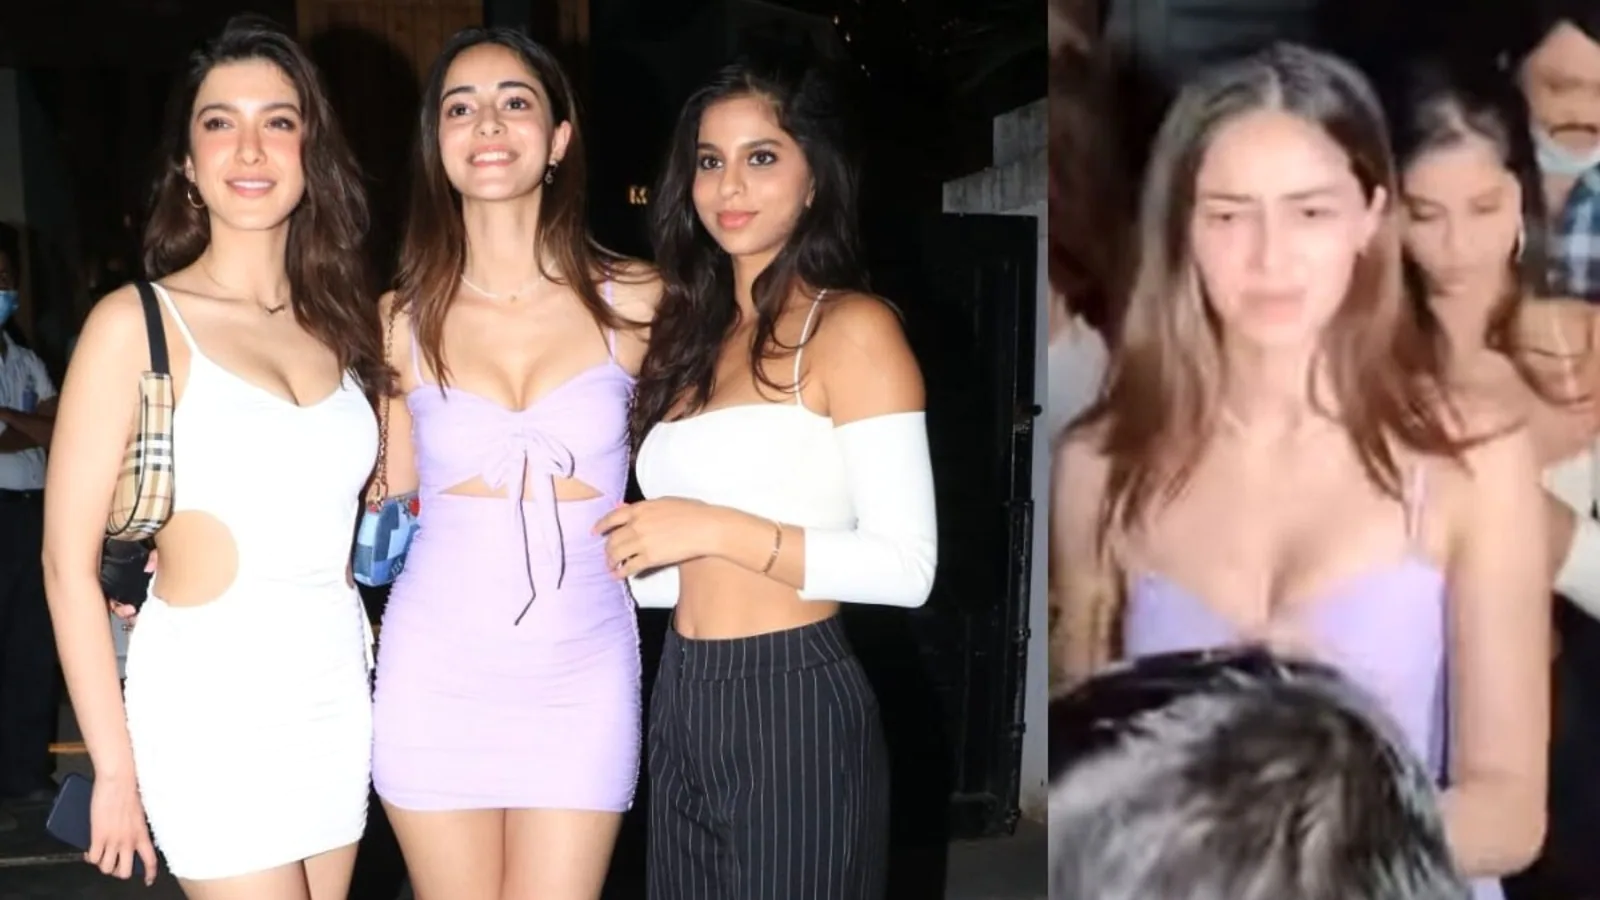 Ananya Panday steps out with BFFs Suhana Khan and Shanaya Kapoor, asks paparazzi not to scream. Watch